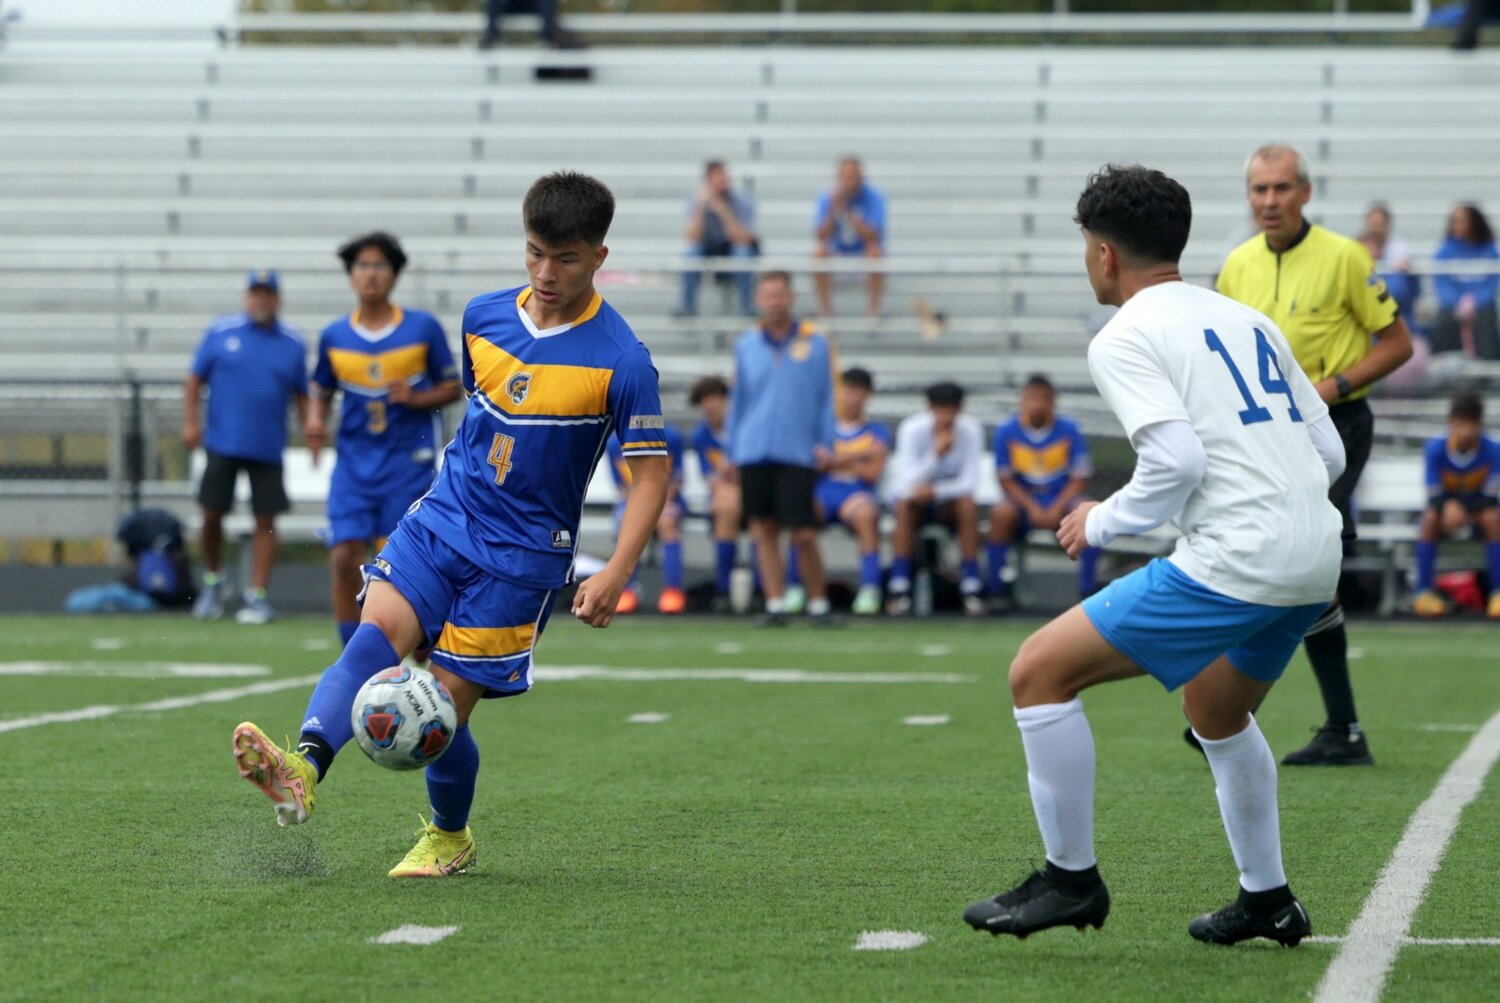 Junior Jaziel Gil-Herrera did it himself scoring all 3 Crawfordsville goals as the Athenians knocked off previously unbeaten and 13th ranked North Putnam on Thursday.